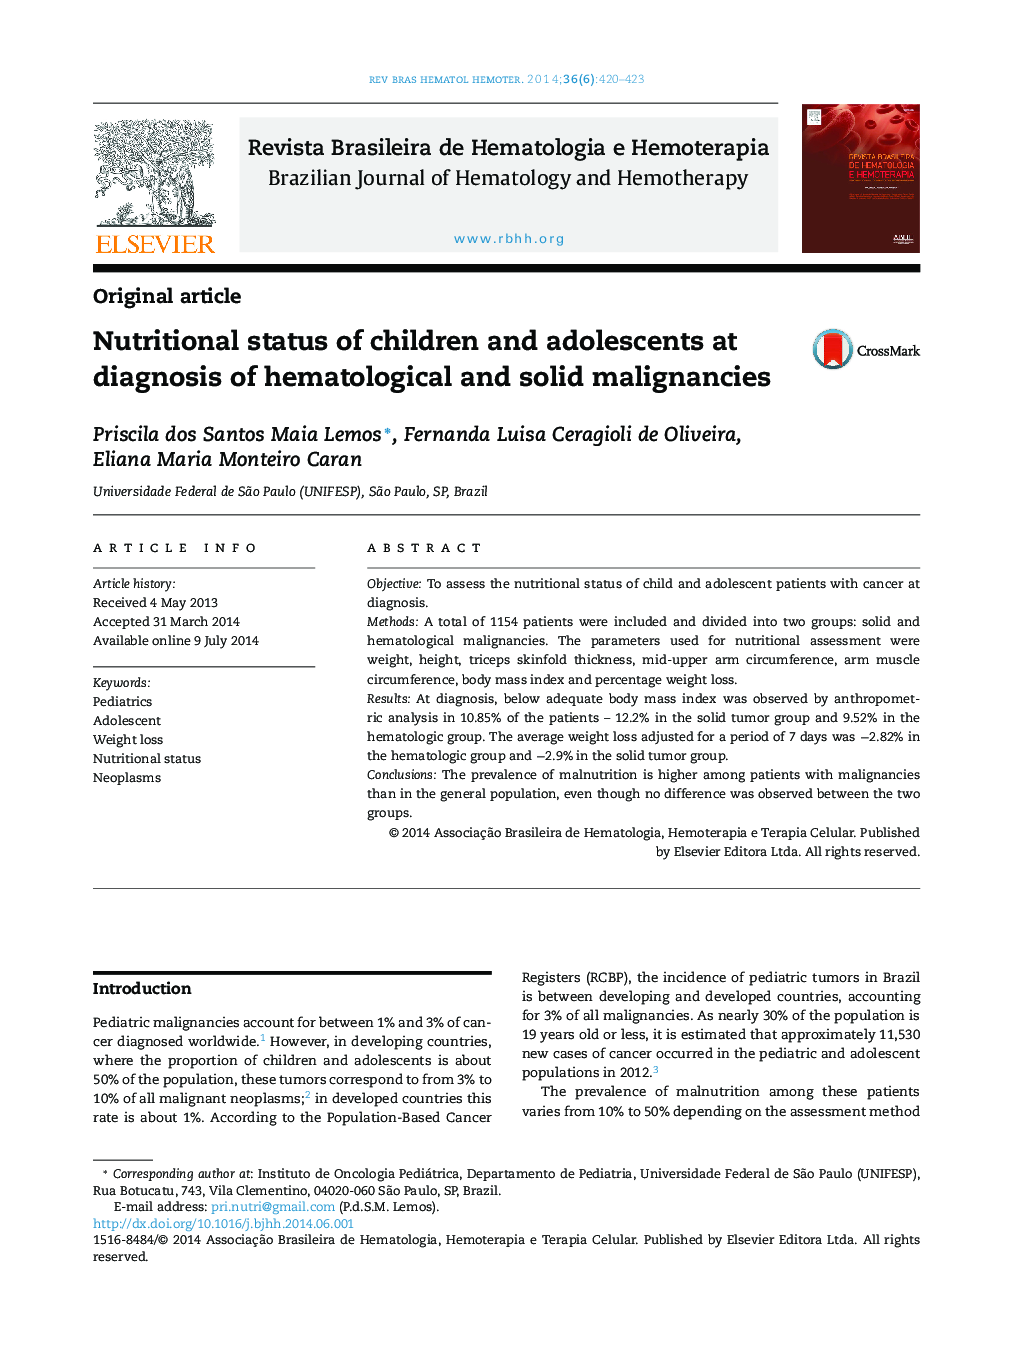 Nutritional status of children and adolescents at diagnosis of hematological and solid malignancies